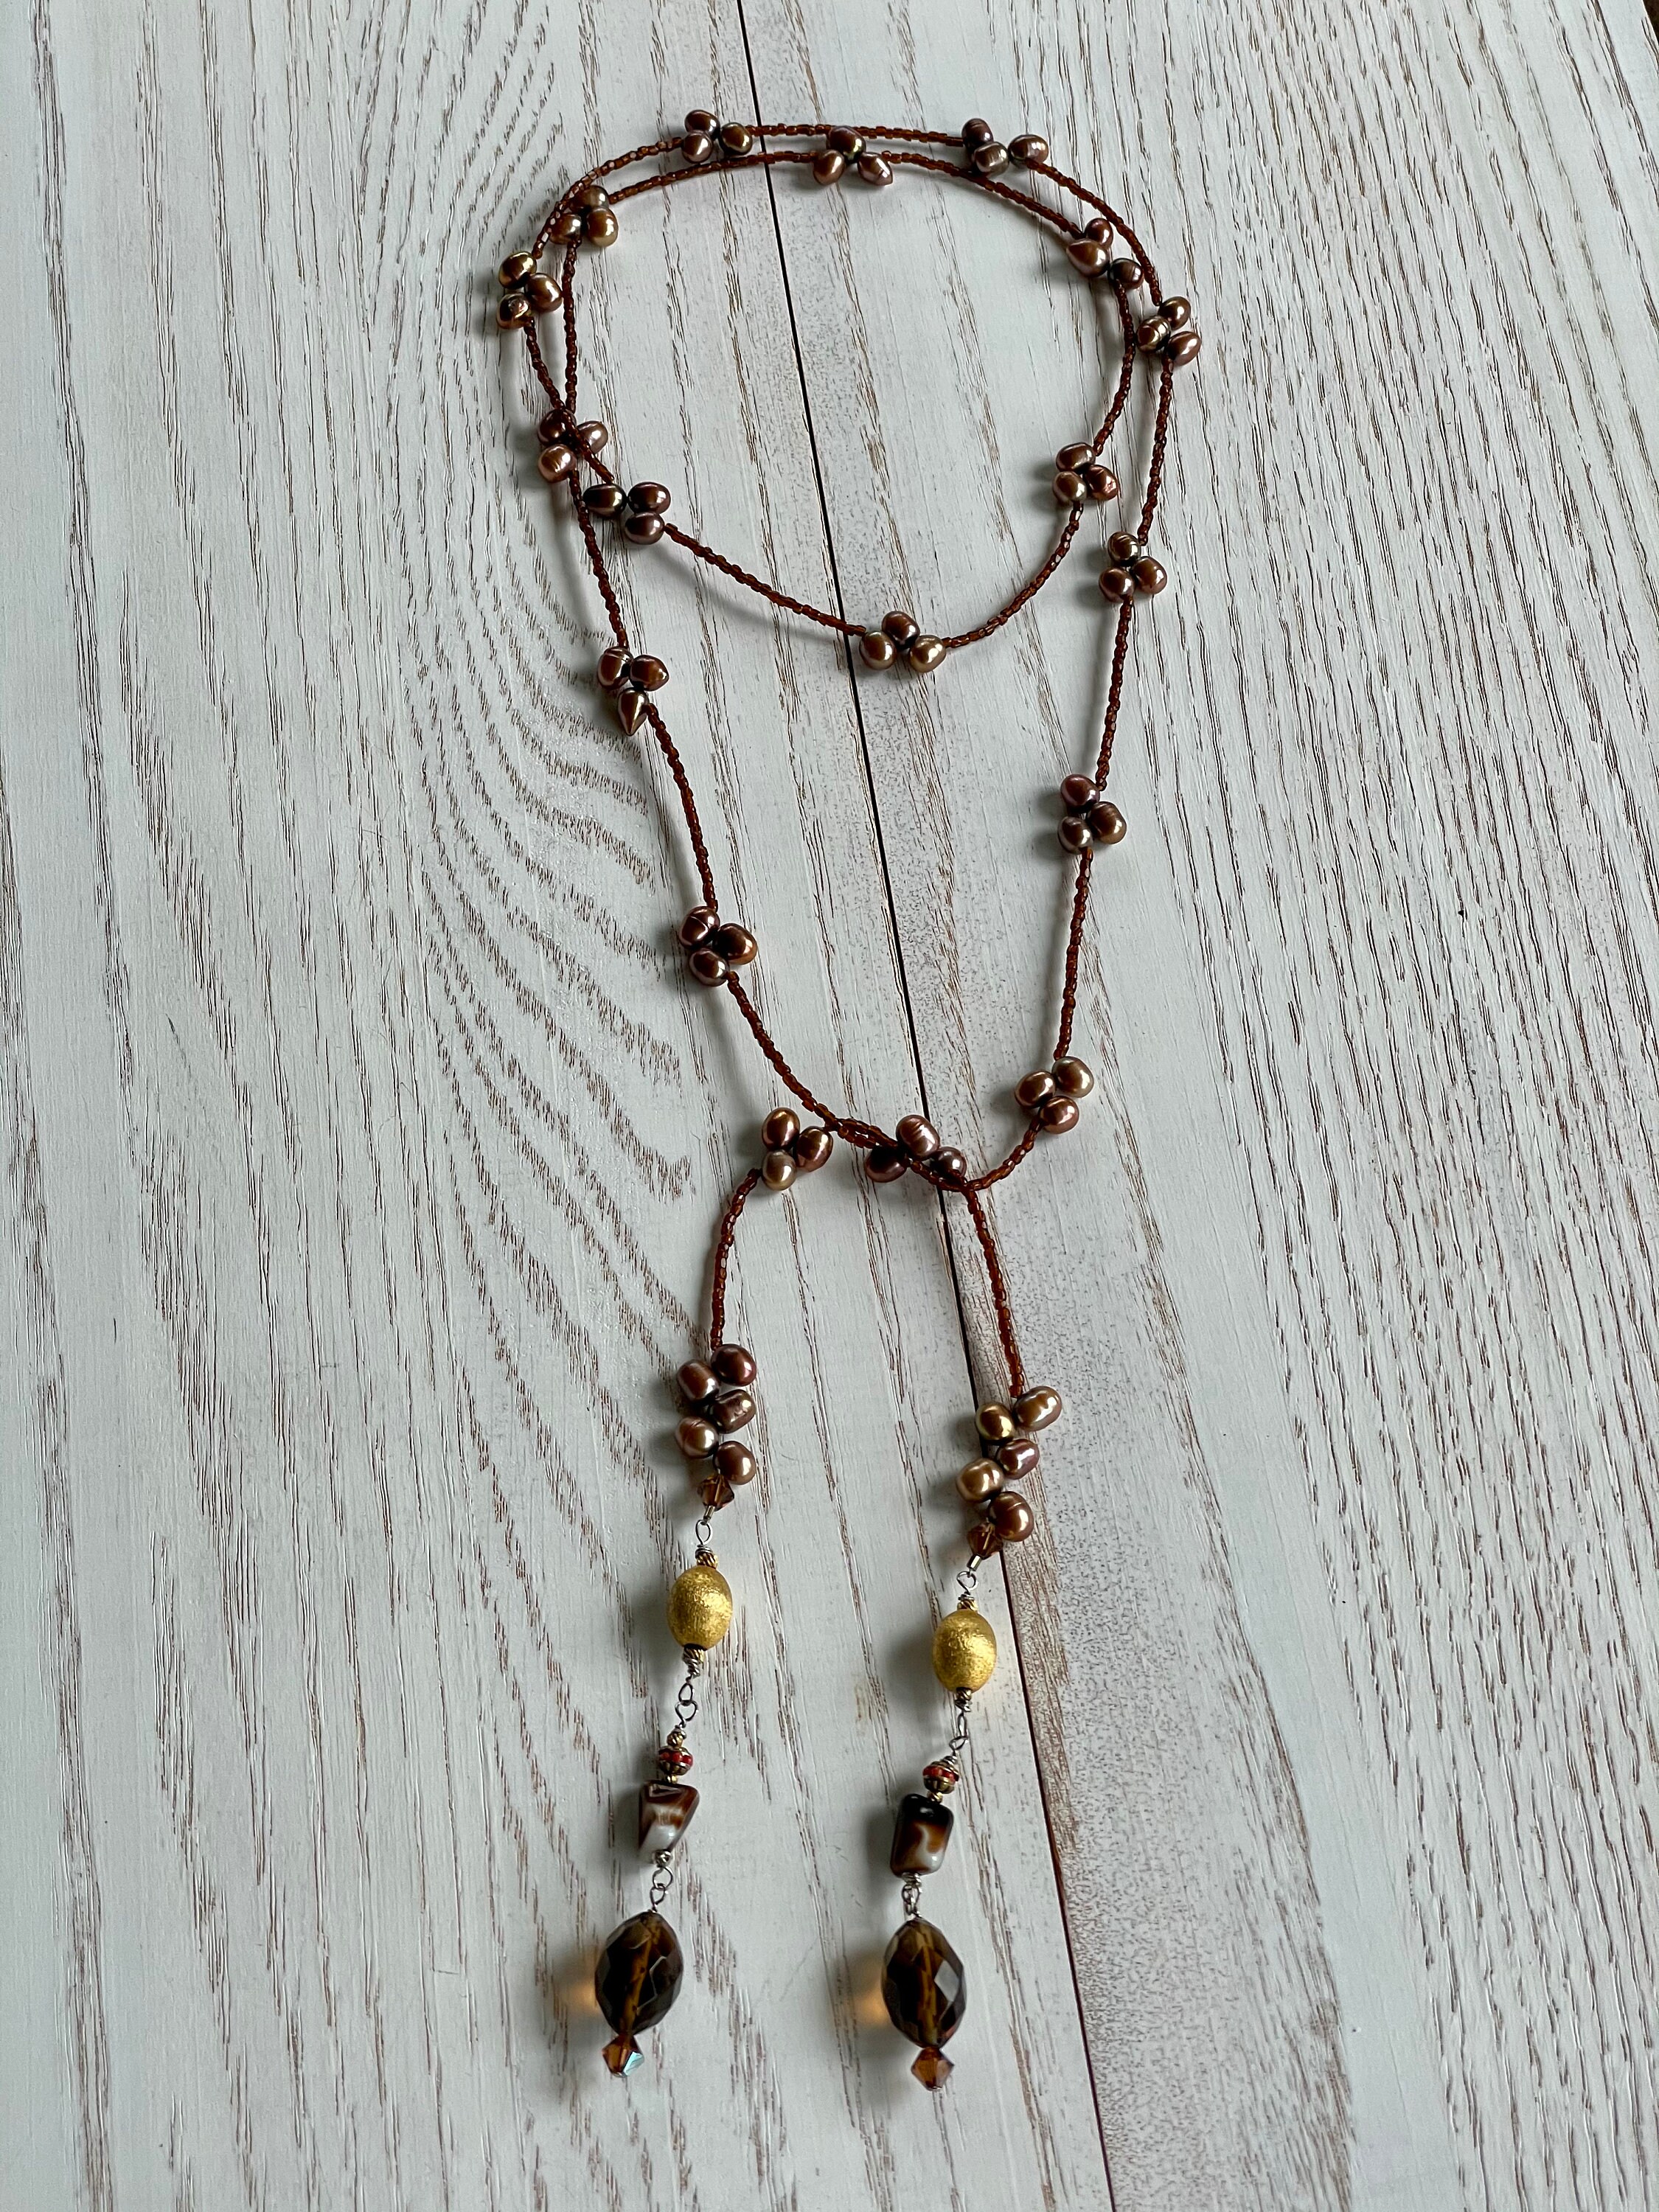 and dangles of black onyx round and Rhodonite nugget Lariat wrap necklace with chili colored diagonally drilled pearls gray seed beads